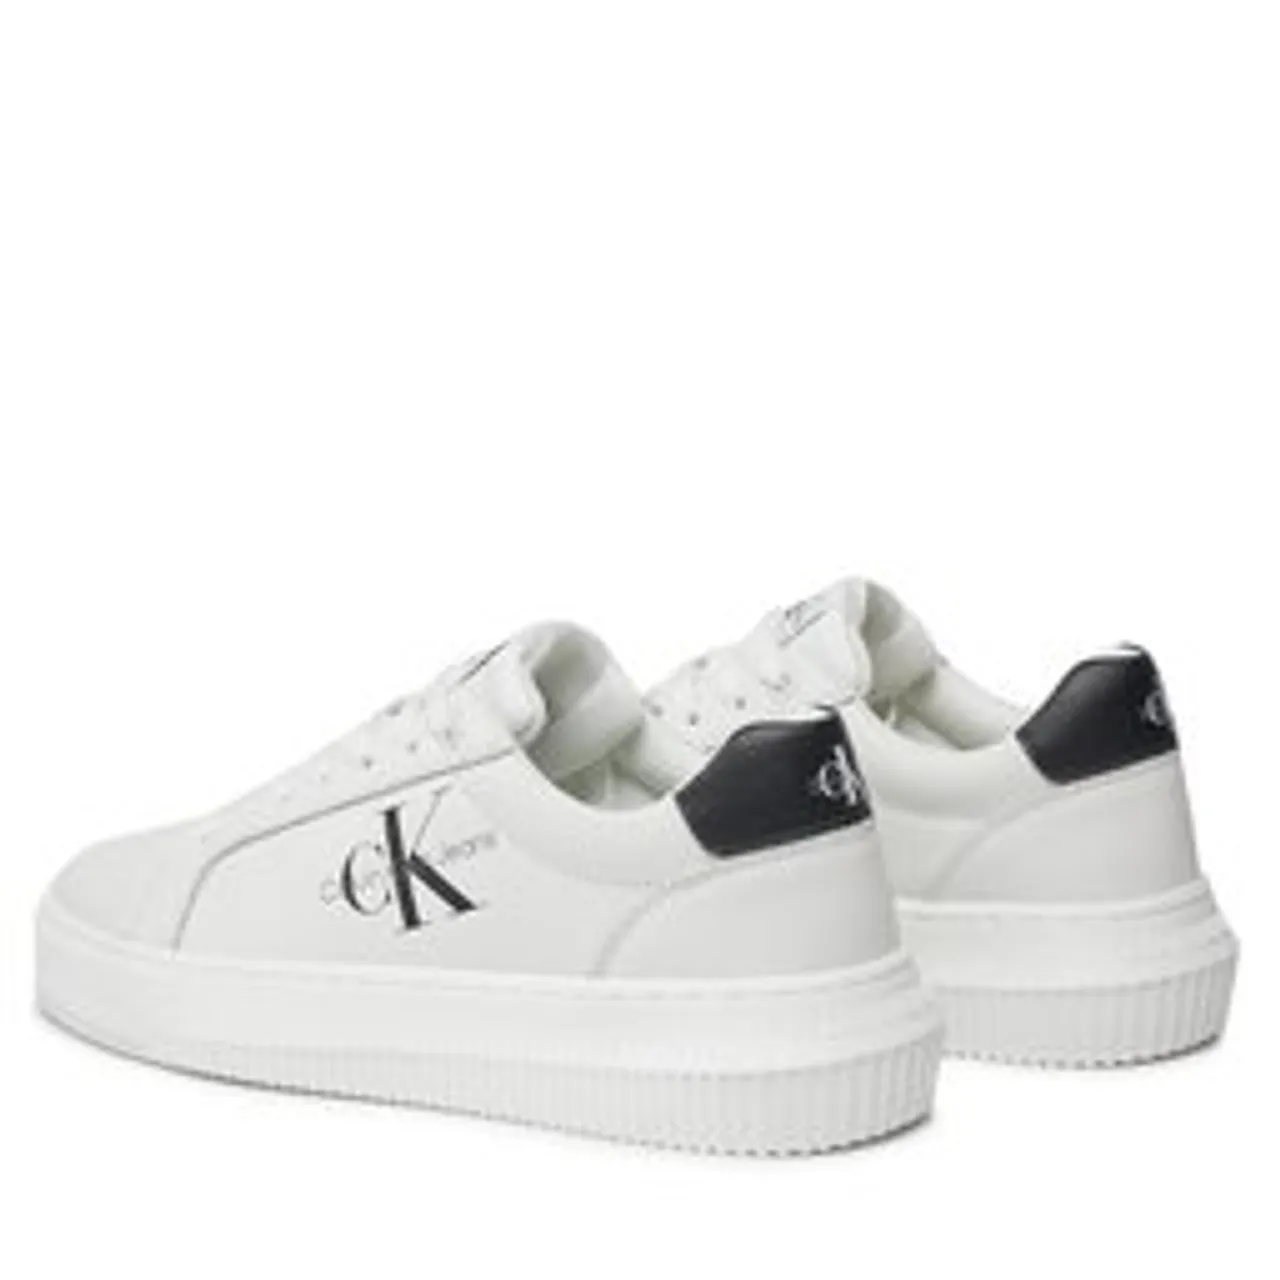 Sneakers Calvin Klein Jeans Chunky Cupsole Laceup Mon Lth Wn YW0YW00823 Bright White/Black 0LB